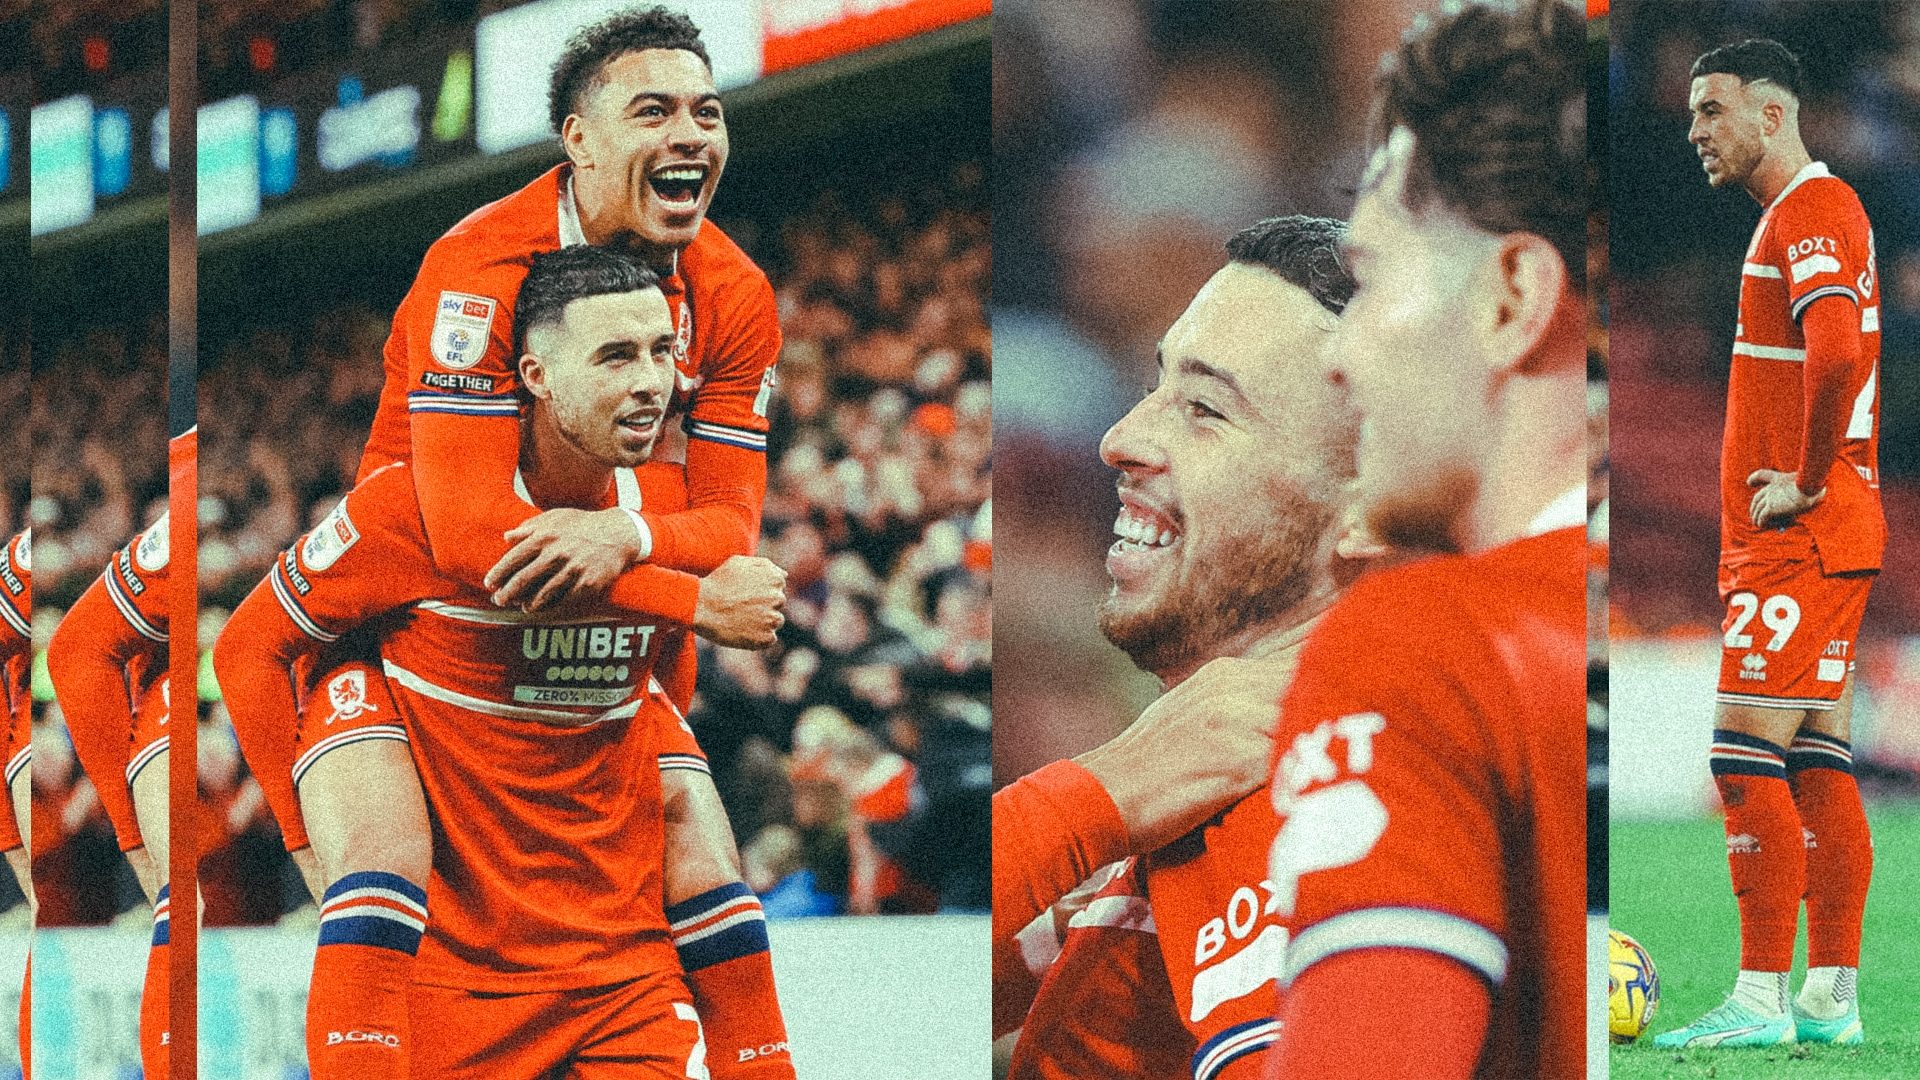 Three images side-to-side of Sam Greenwood celebrating his free-kick against Leicester. I'd love to tell you who the Middlesbrough player is jumping on his back, but I don't know who he is, because he's a Middlesbrough player